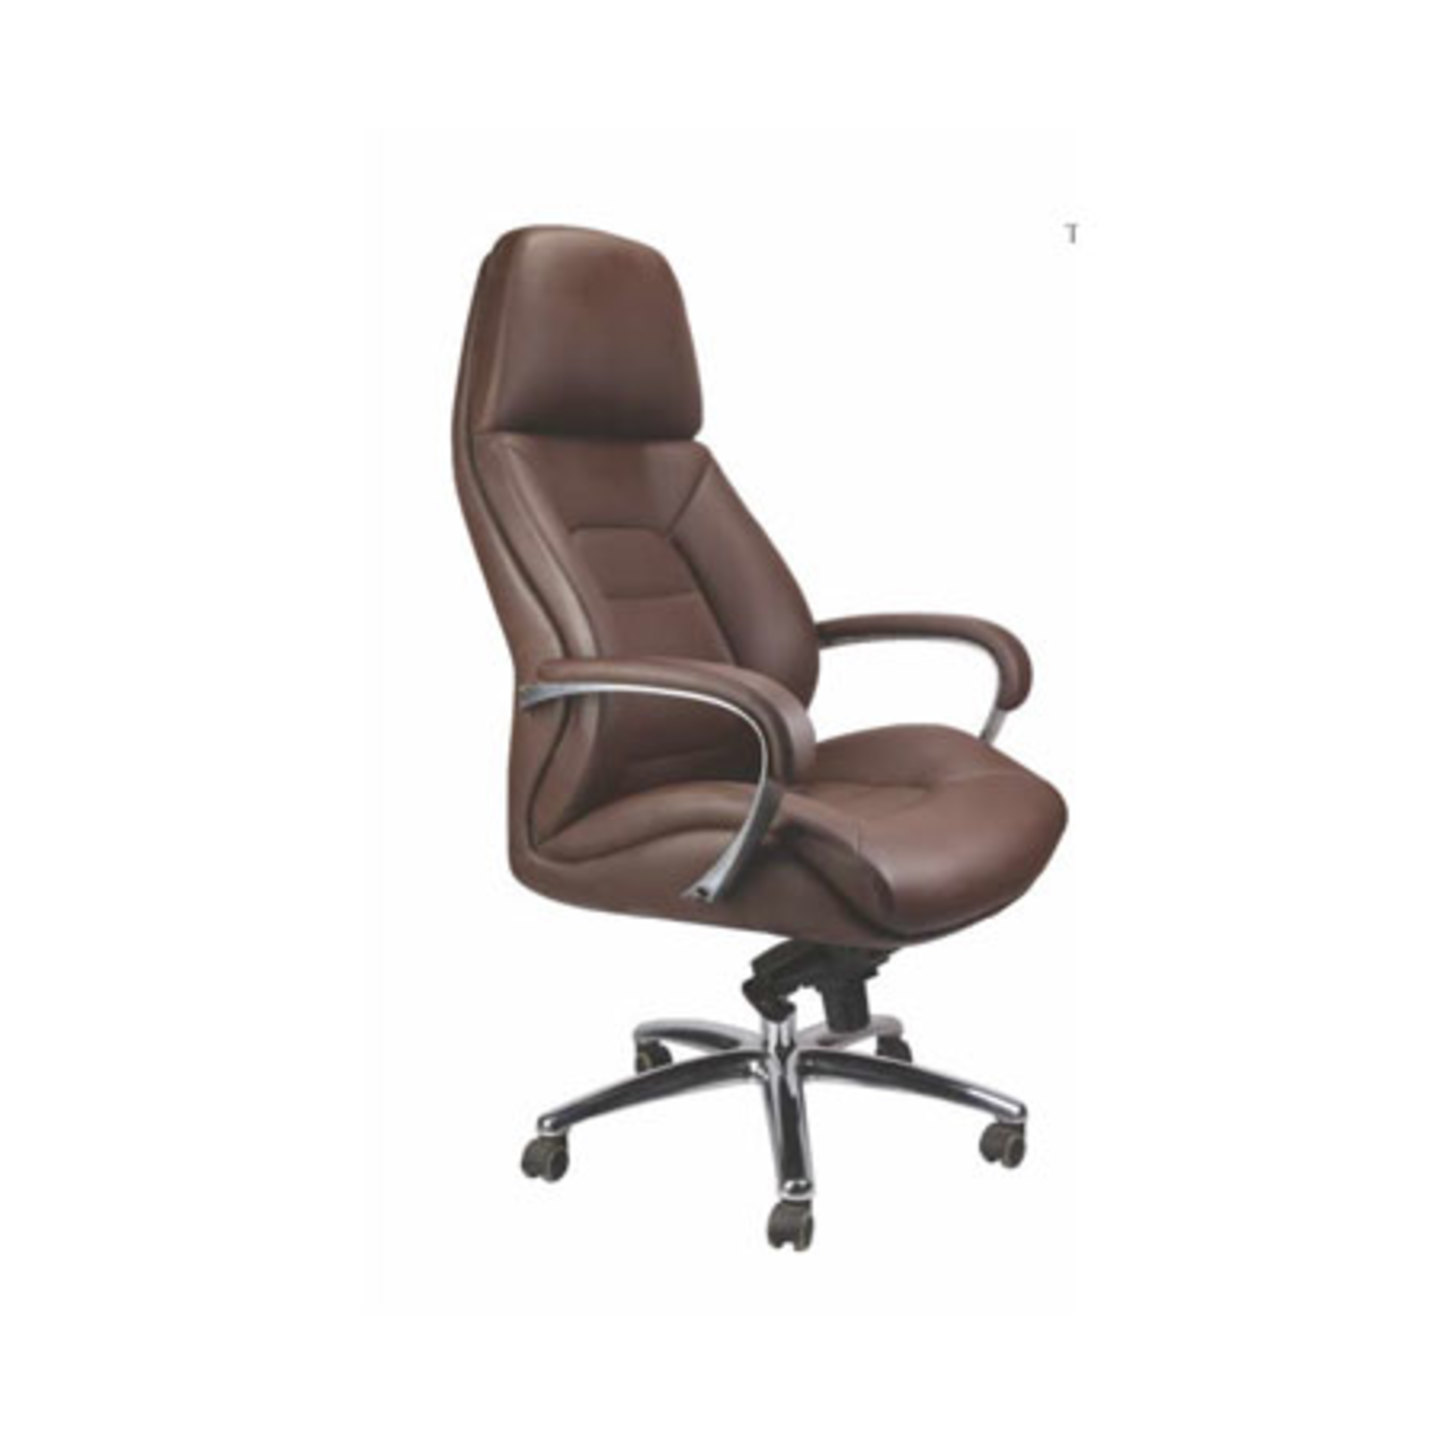 PI High Back Chair Marrazo In Brown Colour